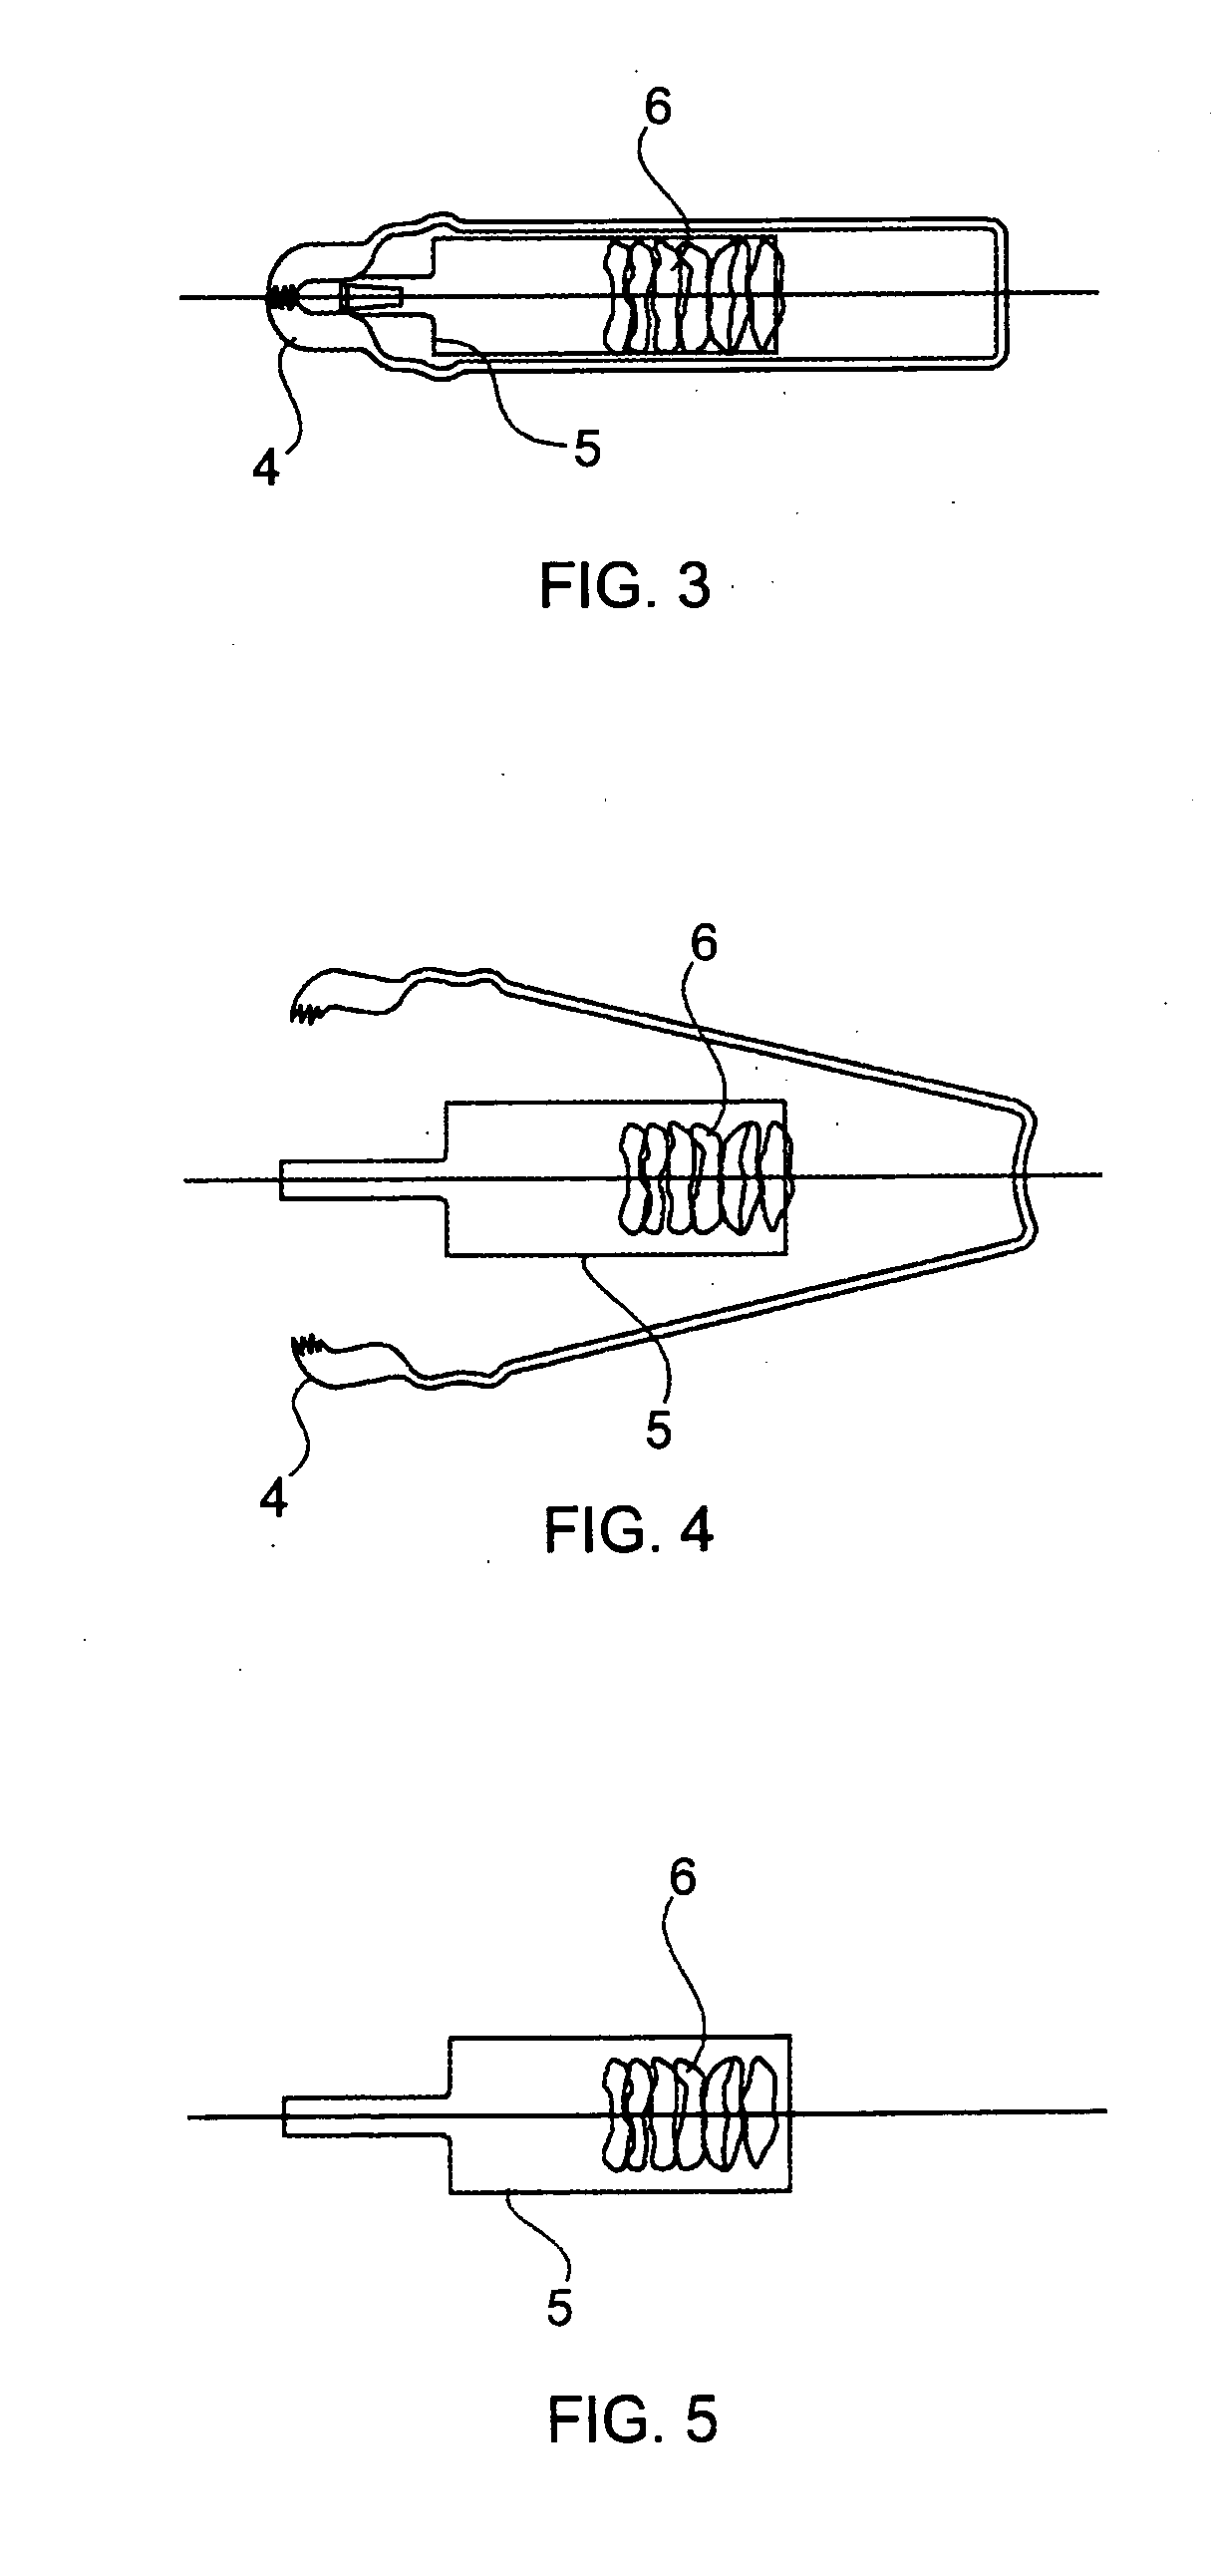 Apparatus for removable distal internal cassette for in situ fixation and specimen processing with serial collection and storage of biopsy specimens